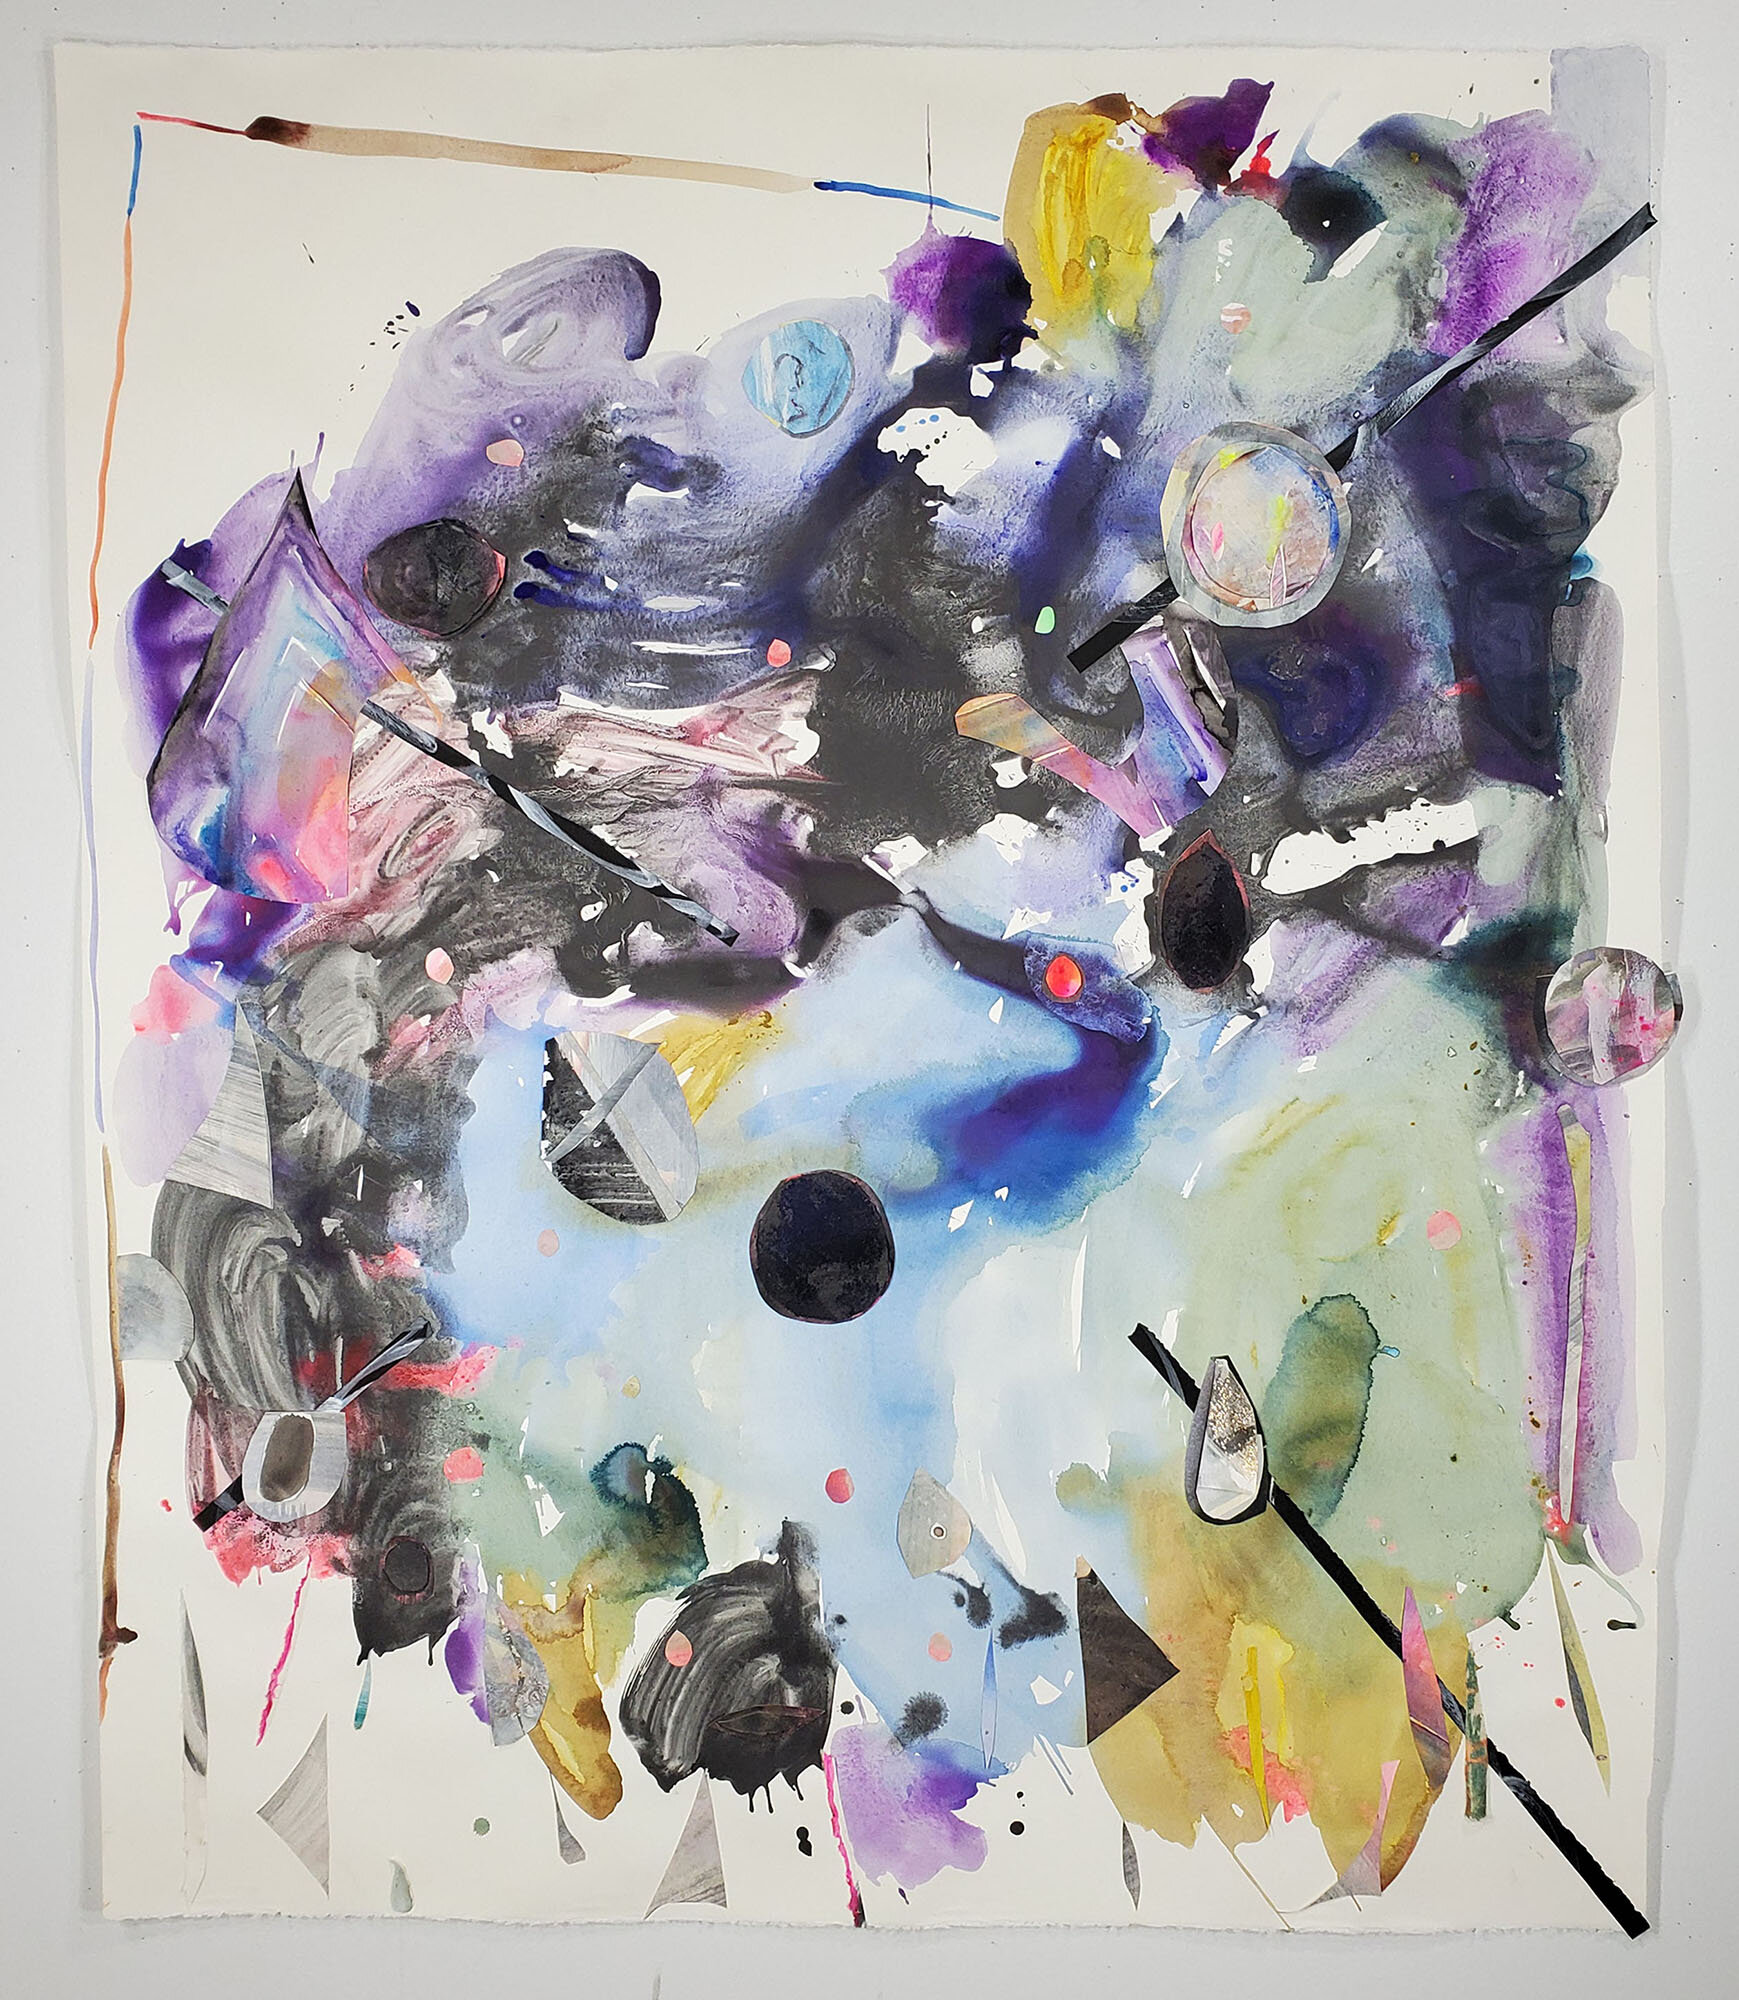   Impossible Egg , 2020 Graphite powder, gouache, acrylic, spray paint, glitter paint, felt, and canvas on paper 55 x 46 ½ inches  